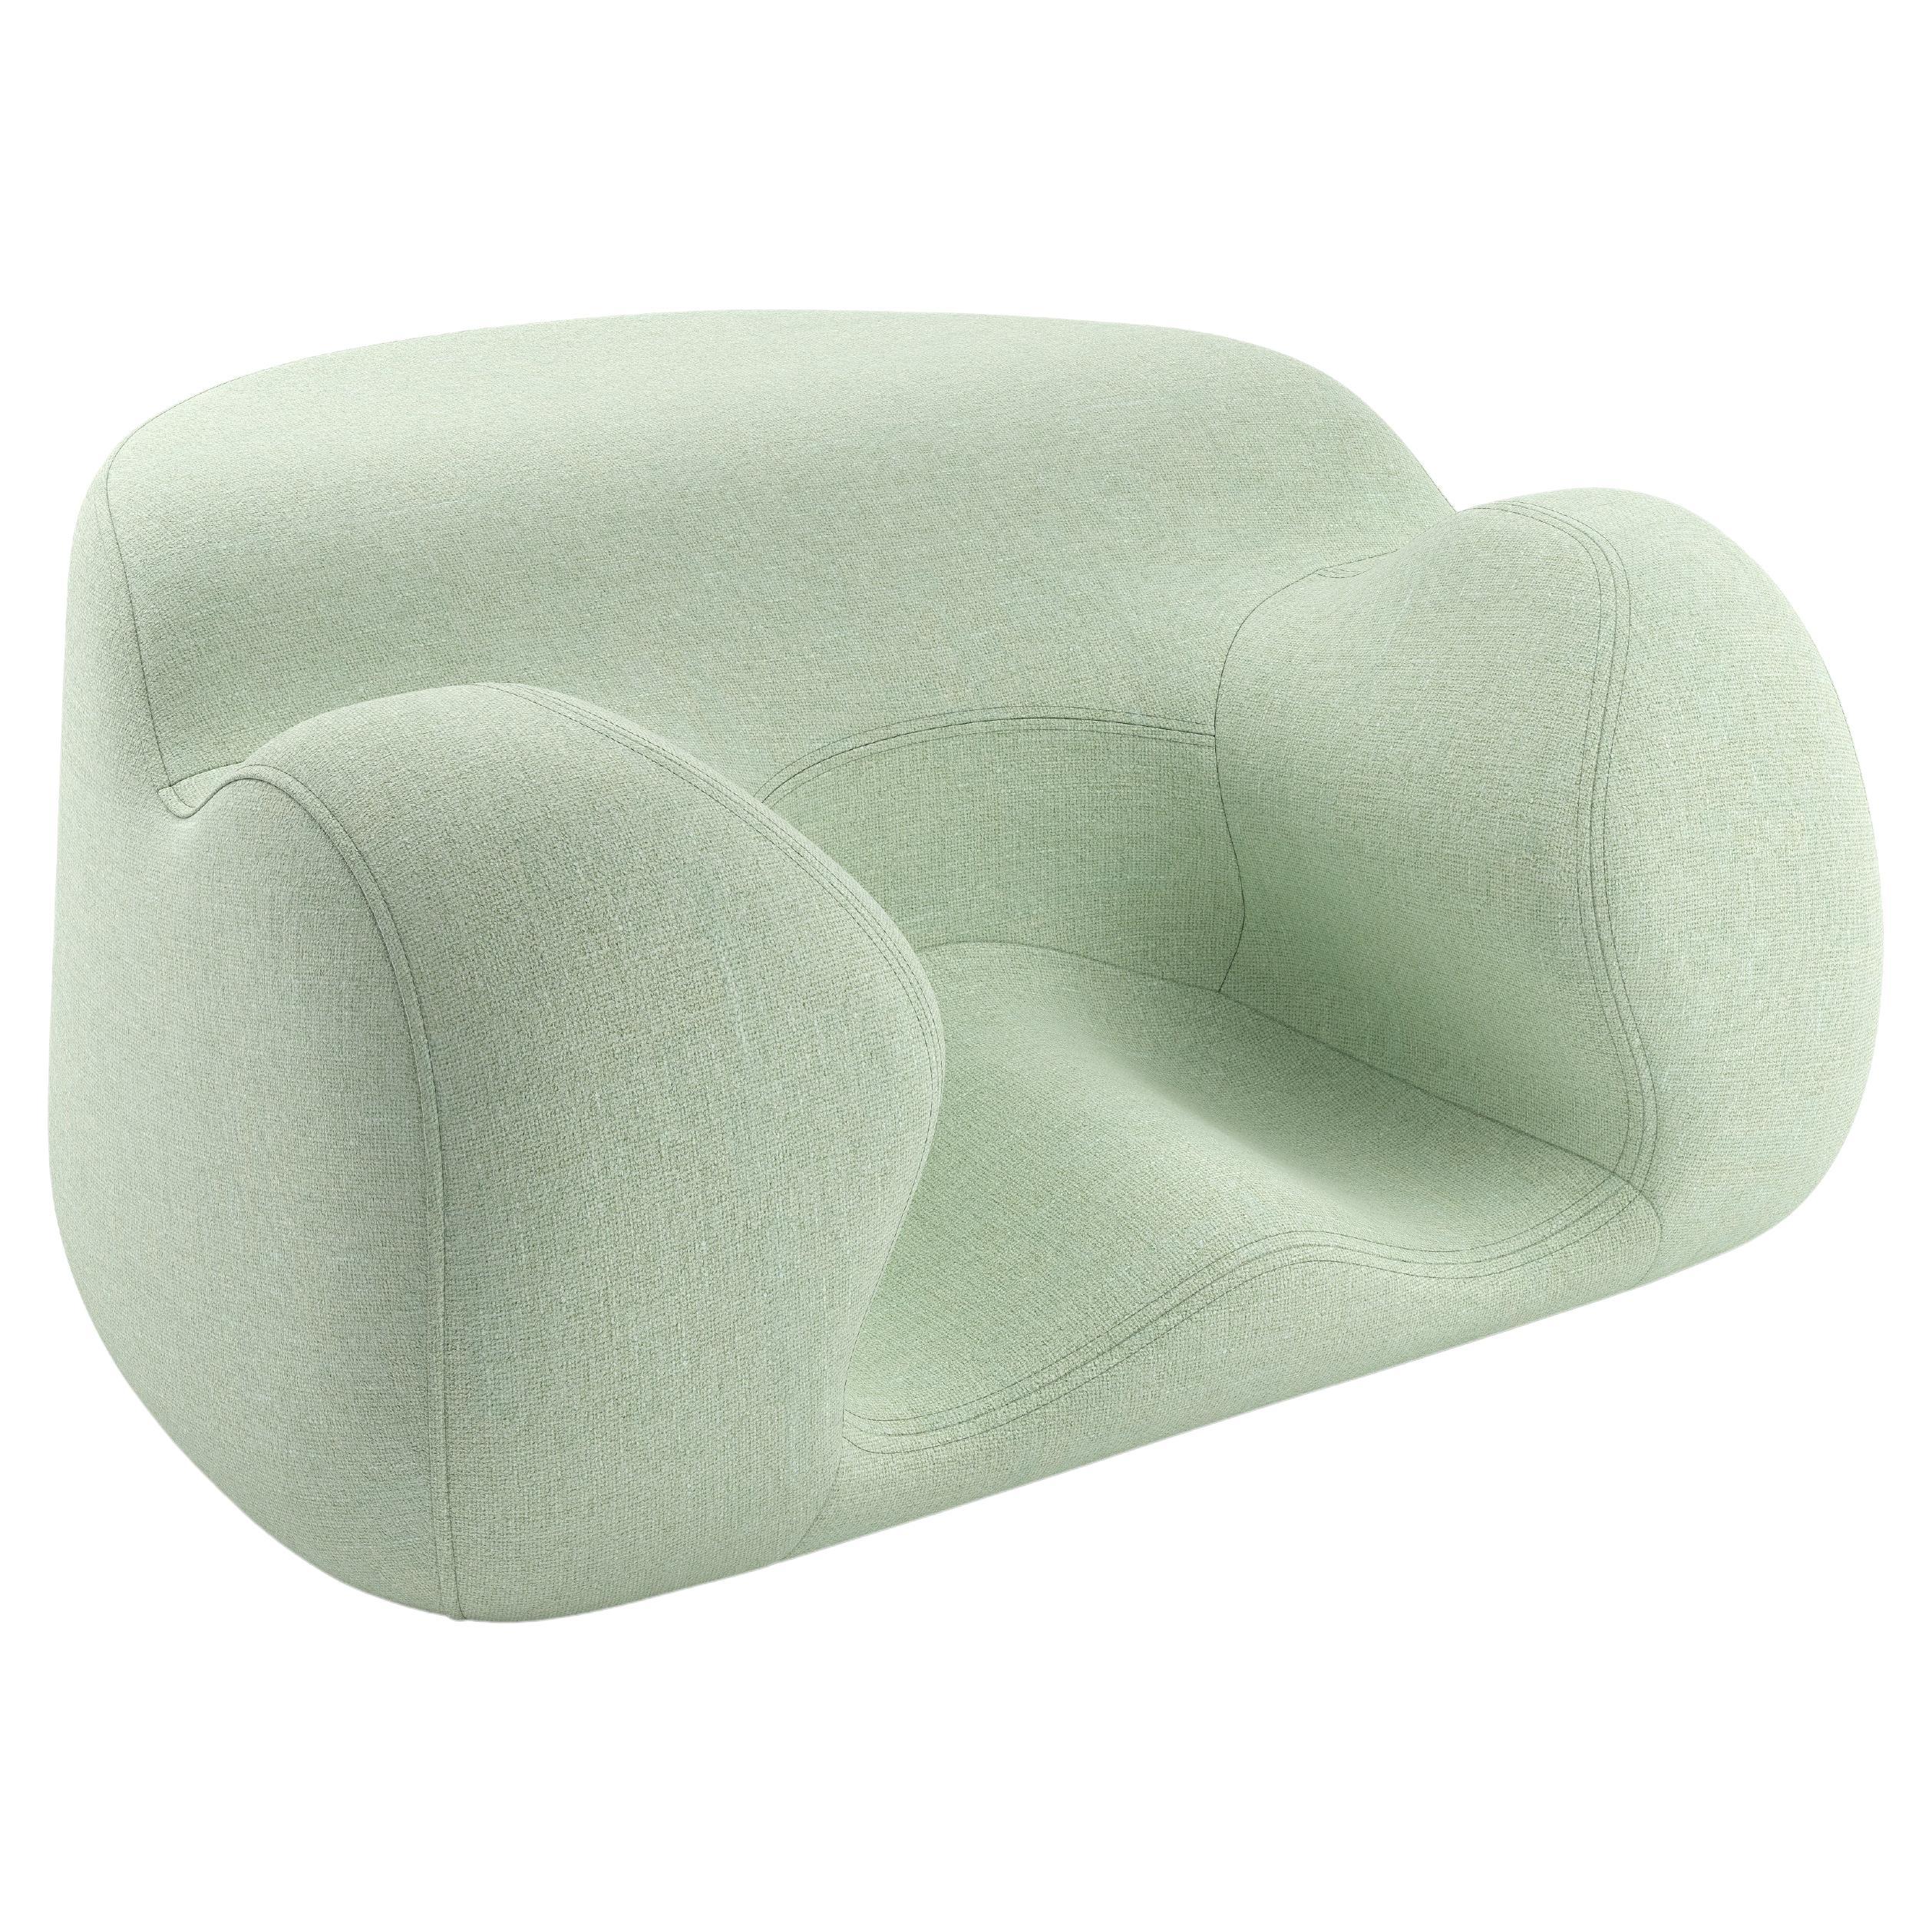 Oyster Wellness Seat by Alex Muradian in Basket Weave Fabric For Sale